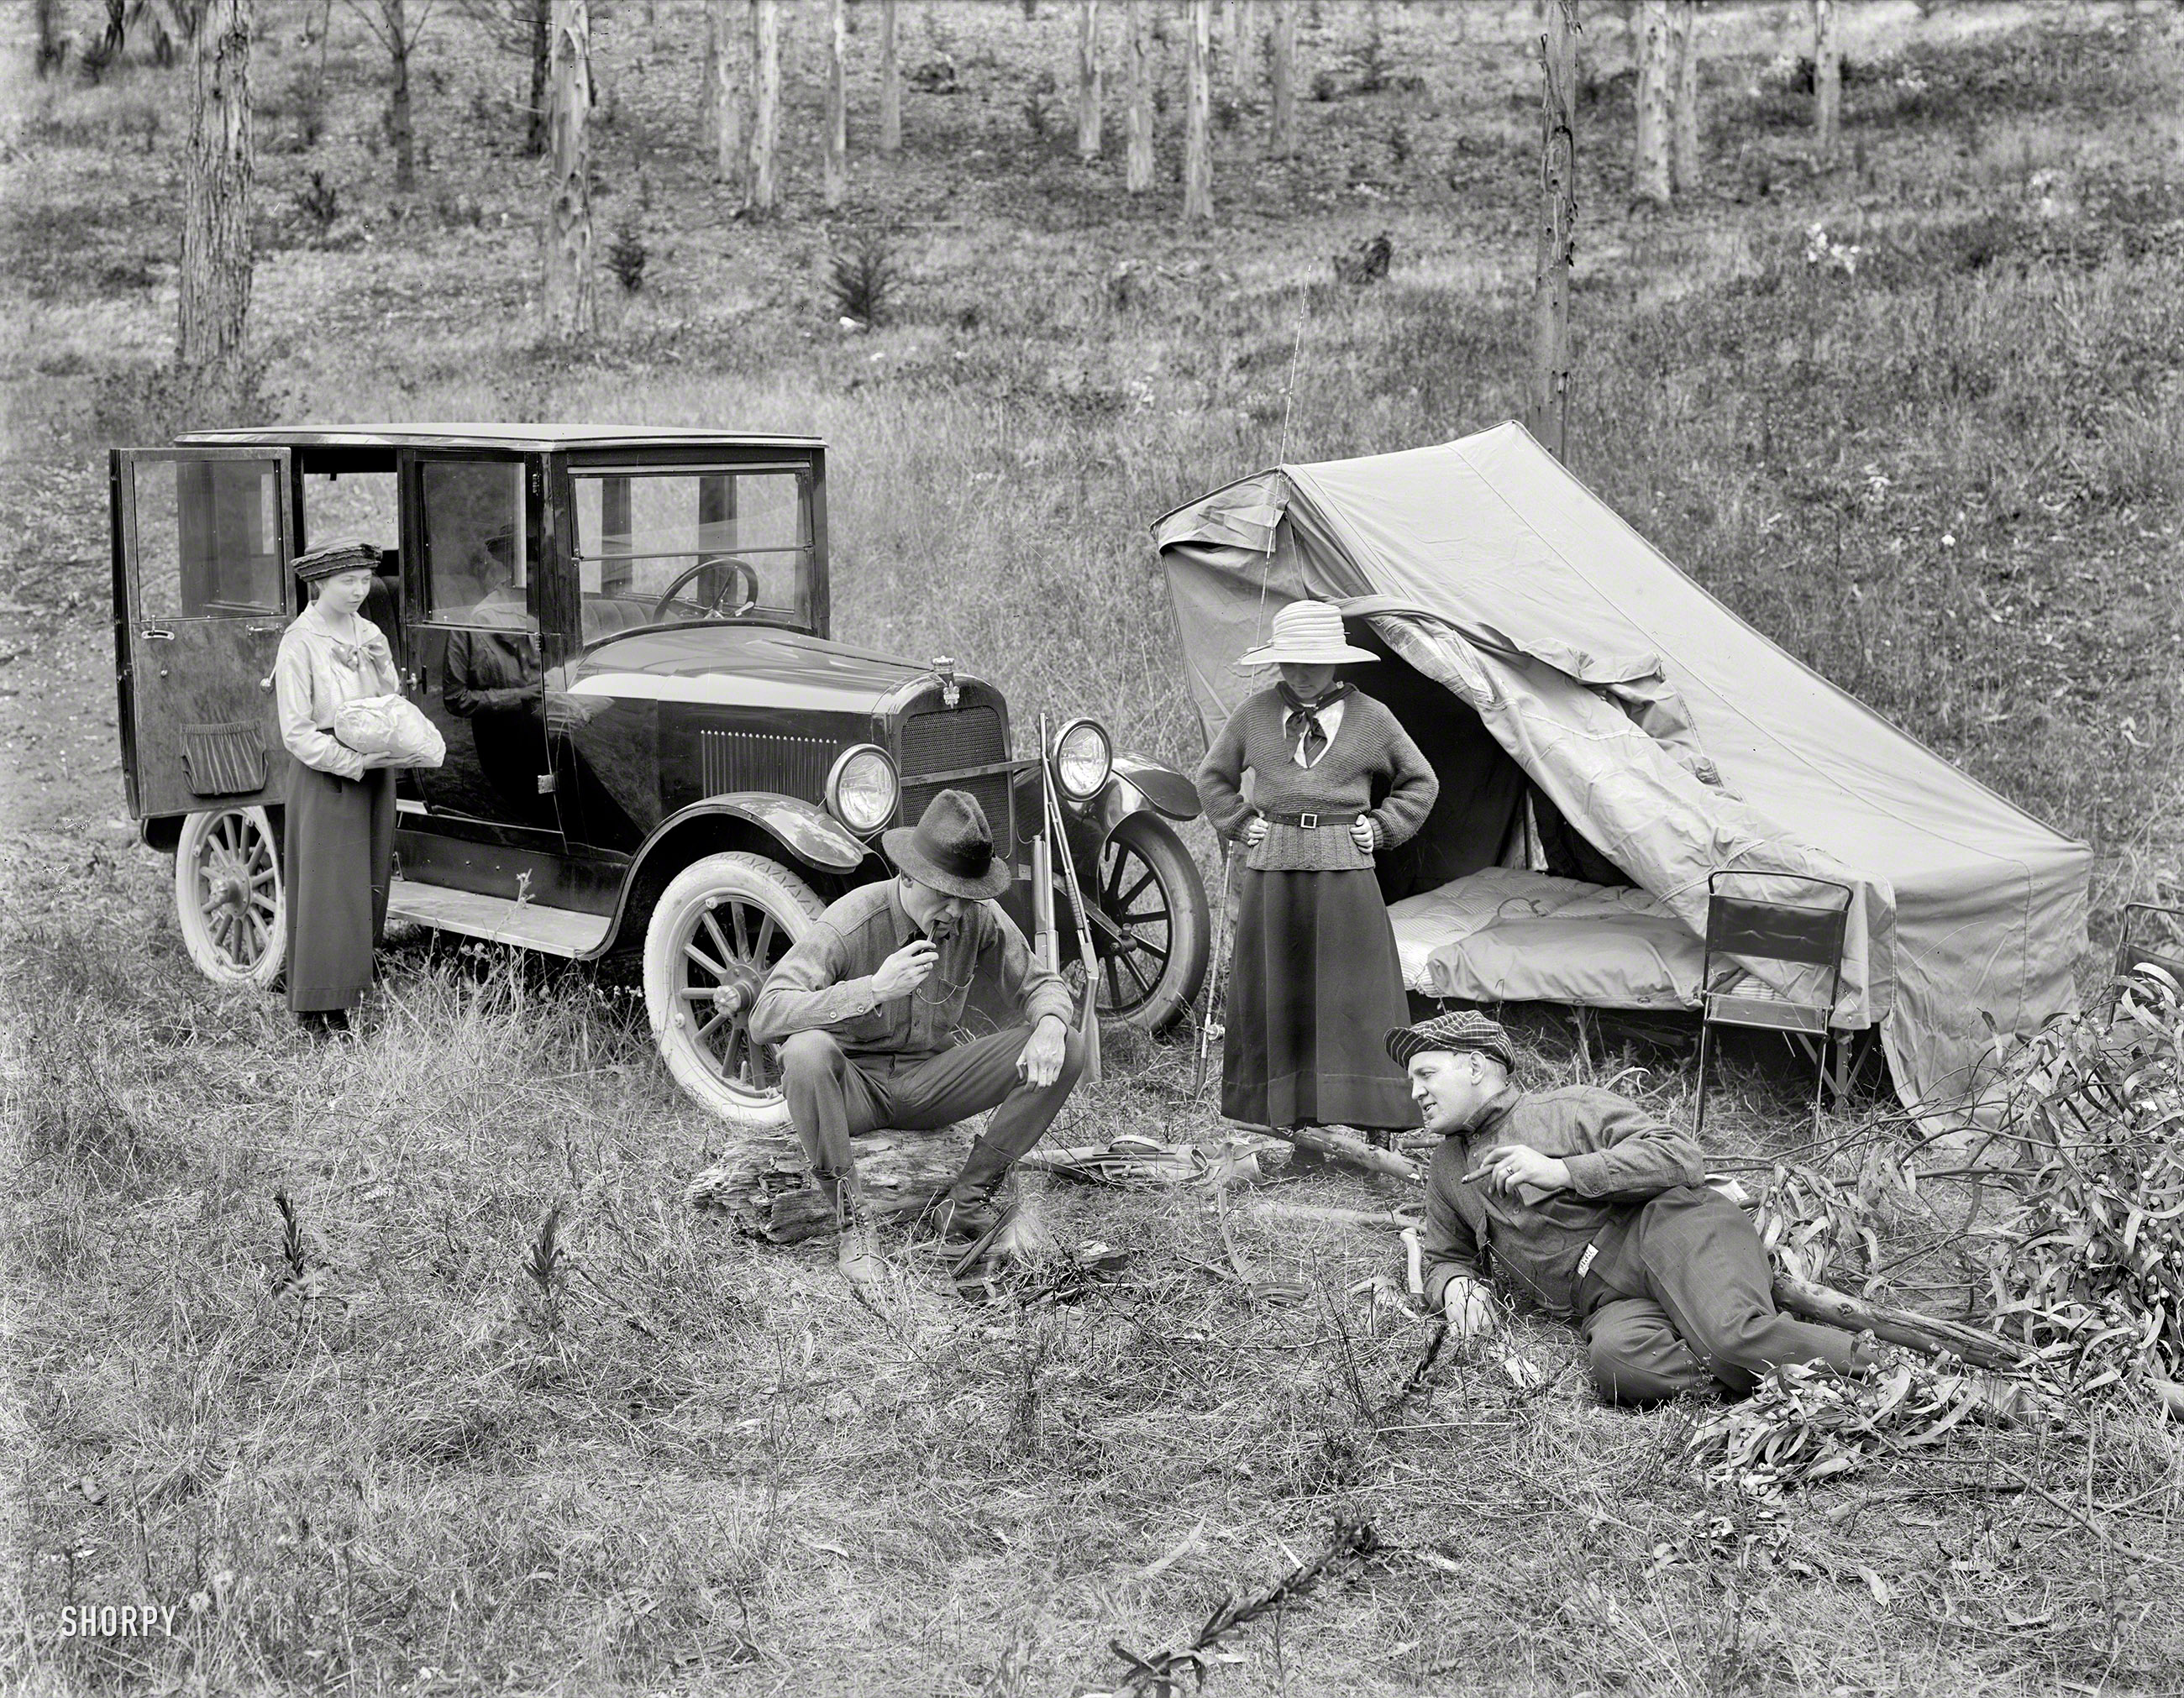 &nbsp; &nbsp; &nbsp; &nbsp; "Say, Bill, don't you think the girls did a marvelous job setting up the tent?"
California circa 1920. "Briscoe auto at campsite." We'd say it's about time to rustle up some grub. Also we call dibs on that camp chair. Now where'd we put the cocktail shaker? 8.5 x 6.5 inch glass plate by Christopher Helin. View full size.